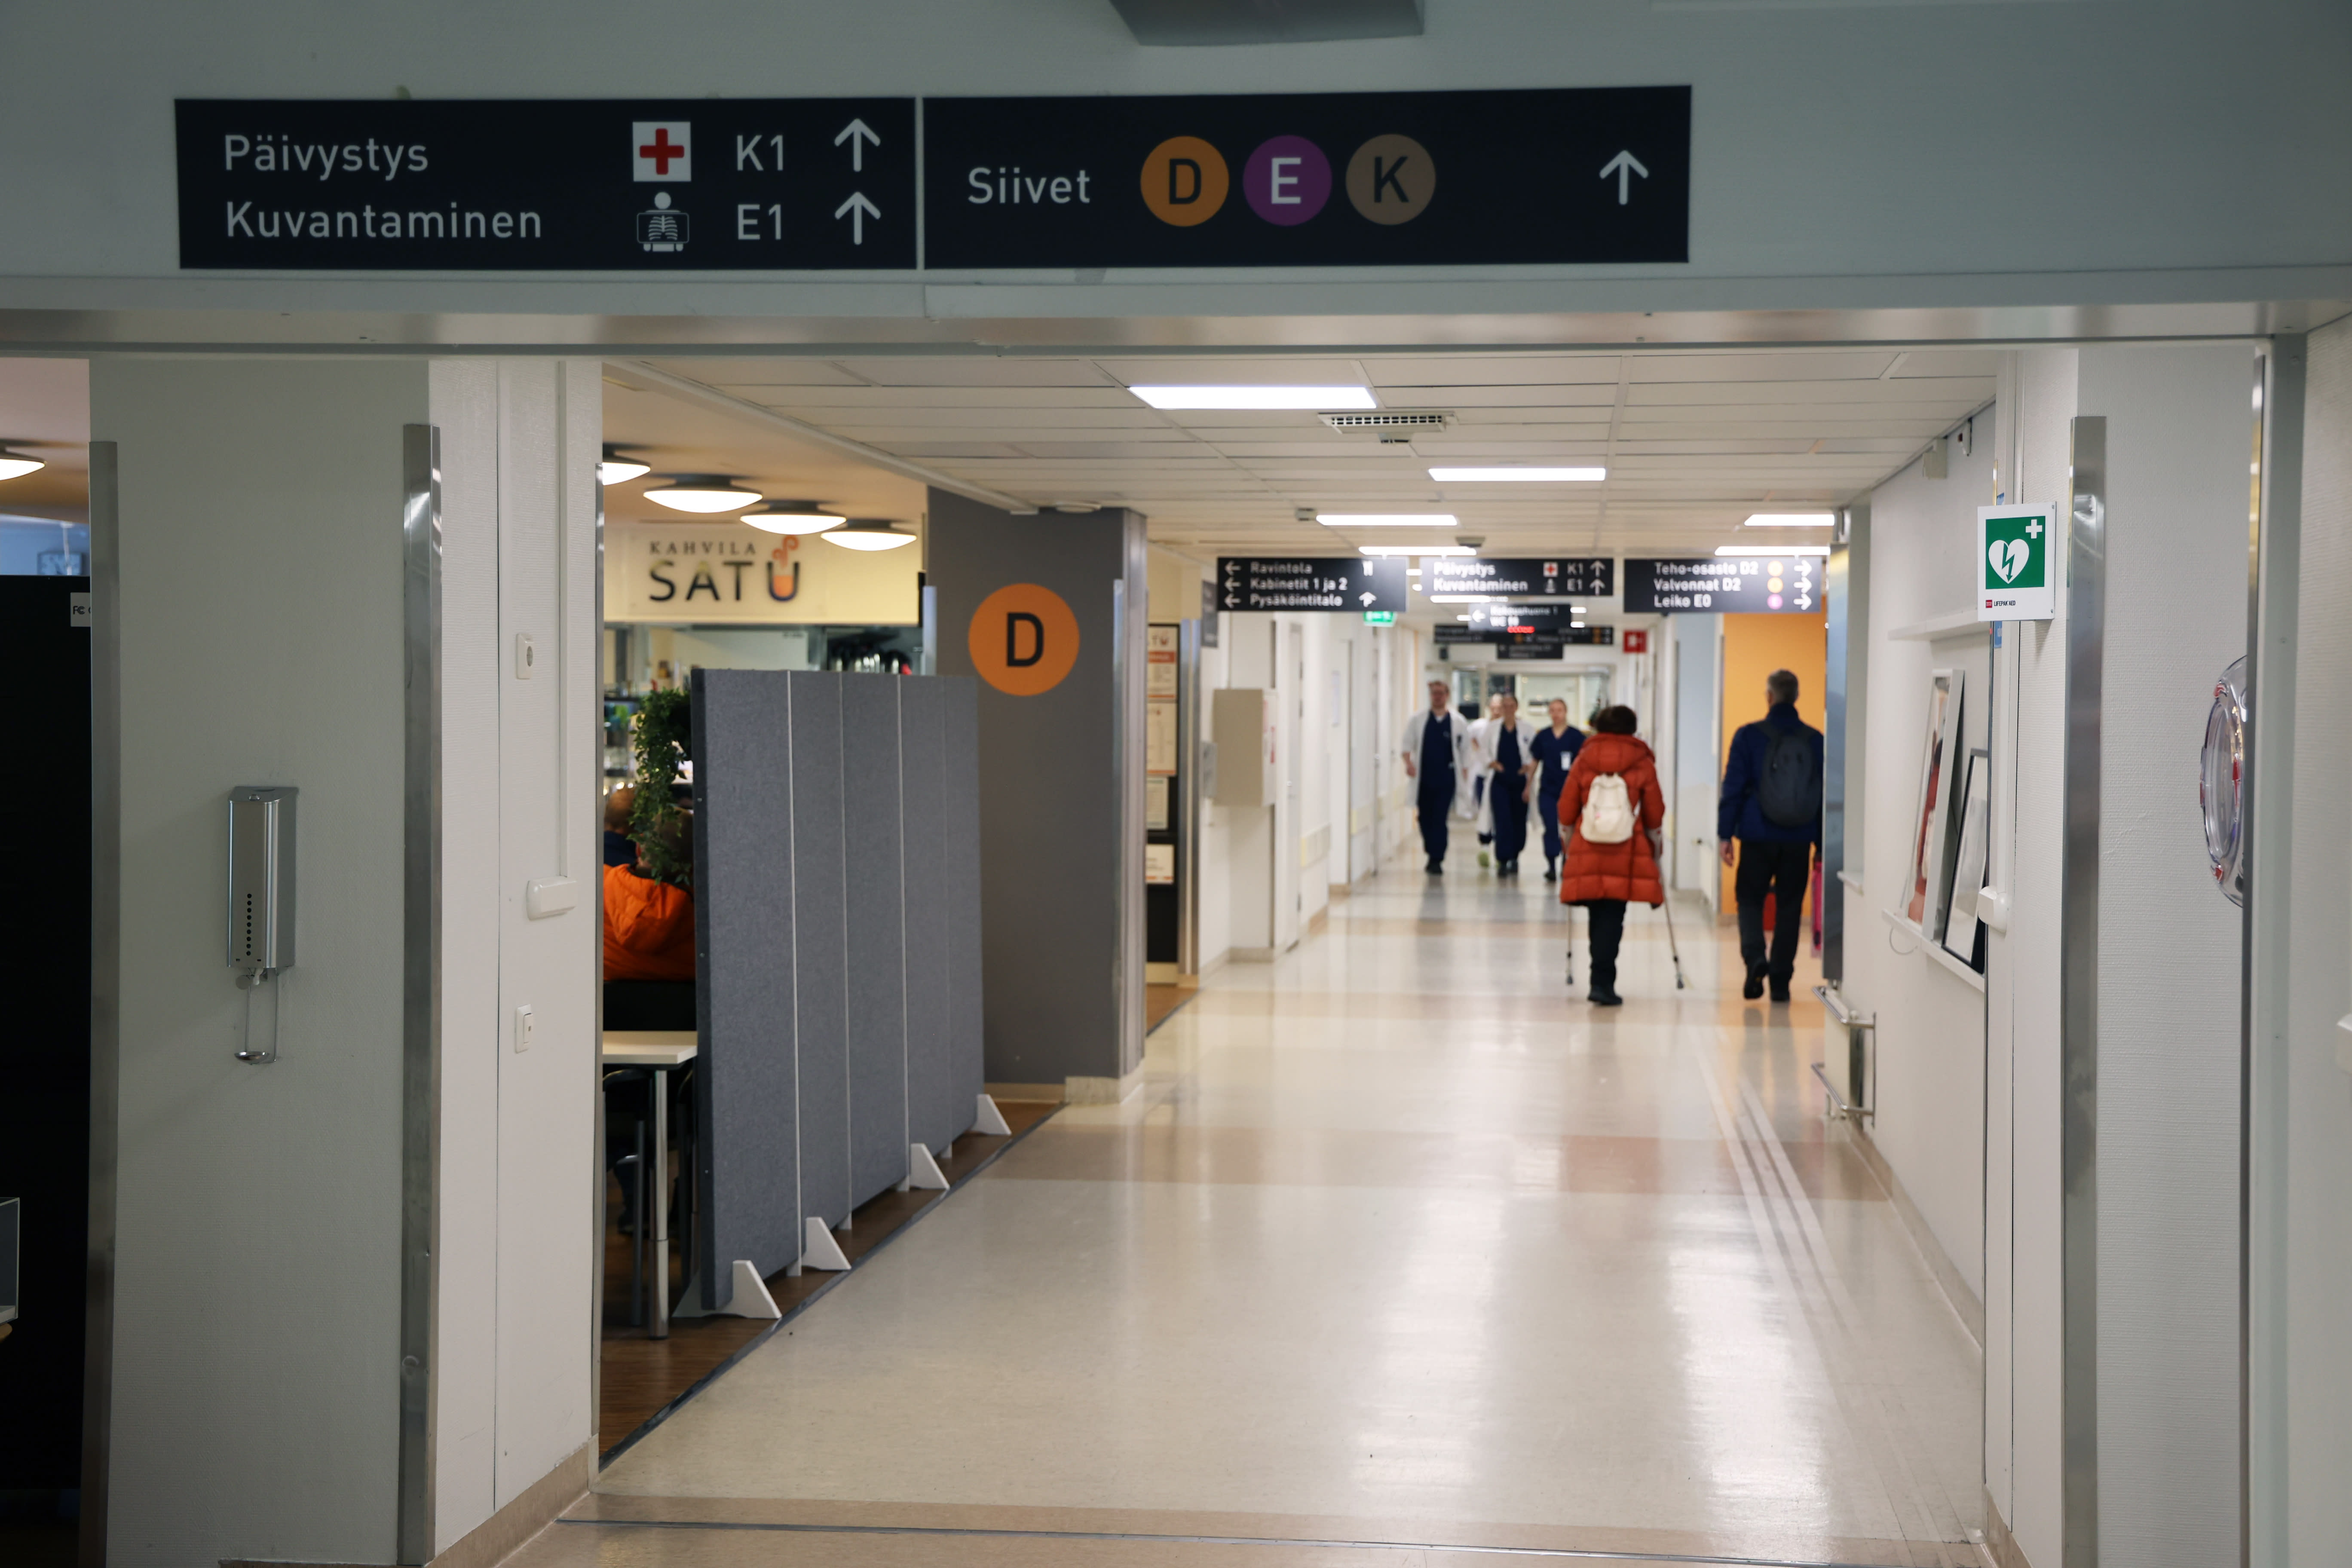 The working group of the Ministry of Health proposes to reduce the number of central hospitals in Finland